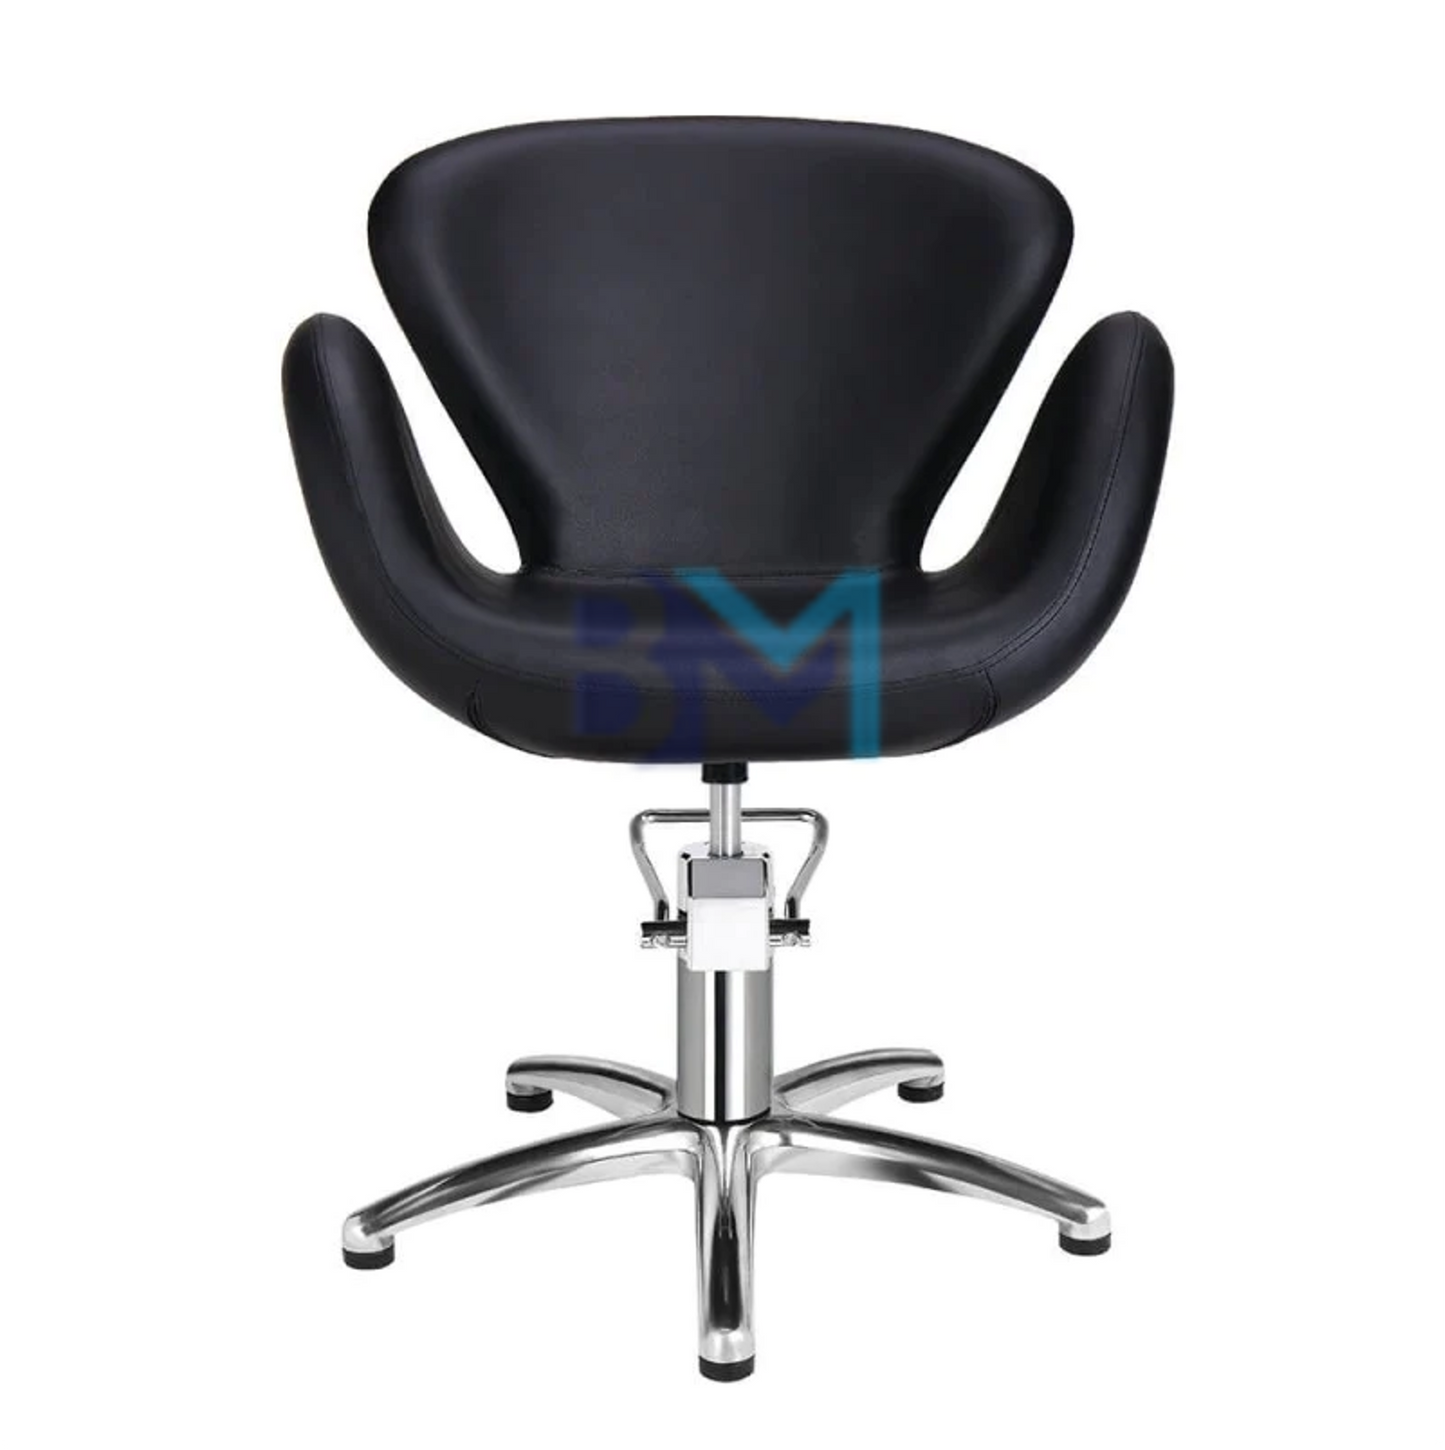 ▶ HAIRDRESSING CHAIRS ➡ LADIES ➡ HIGH QUALITY